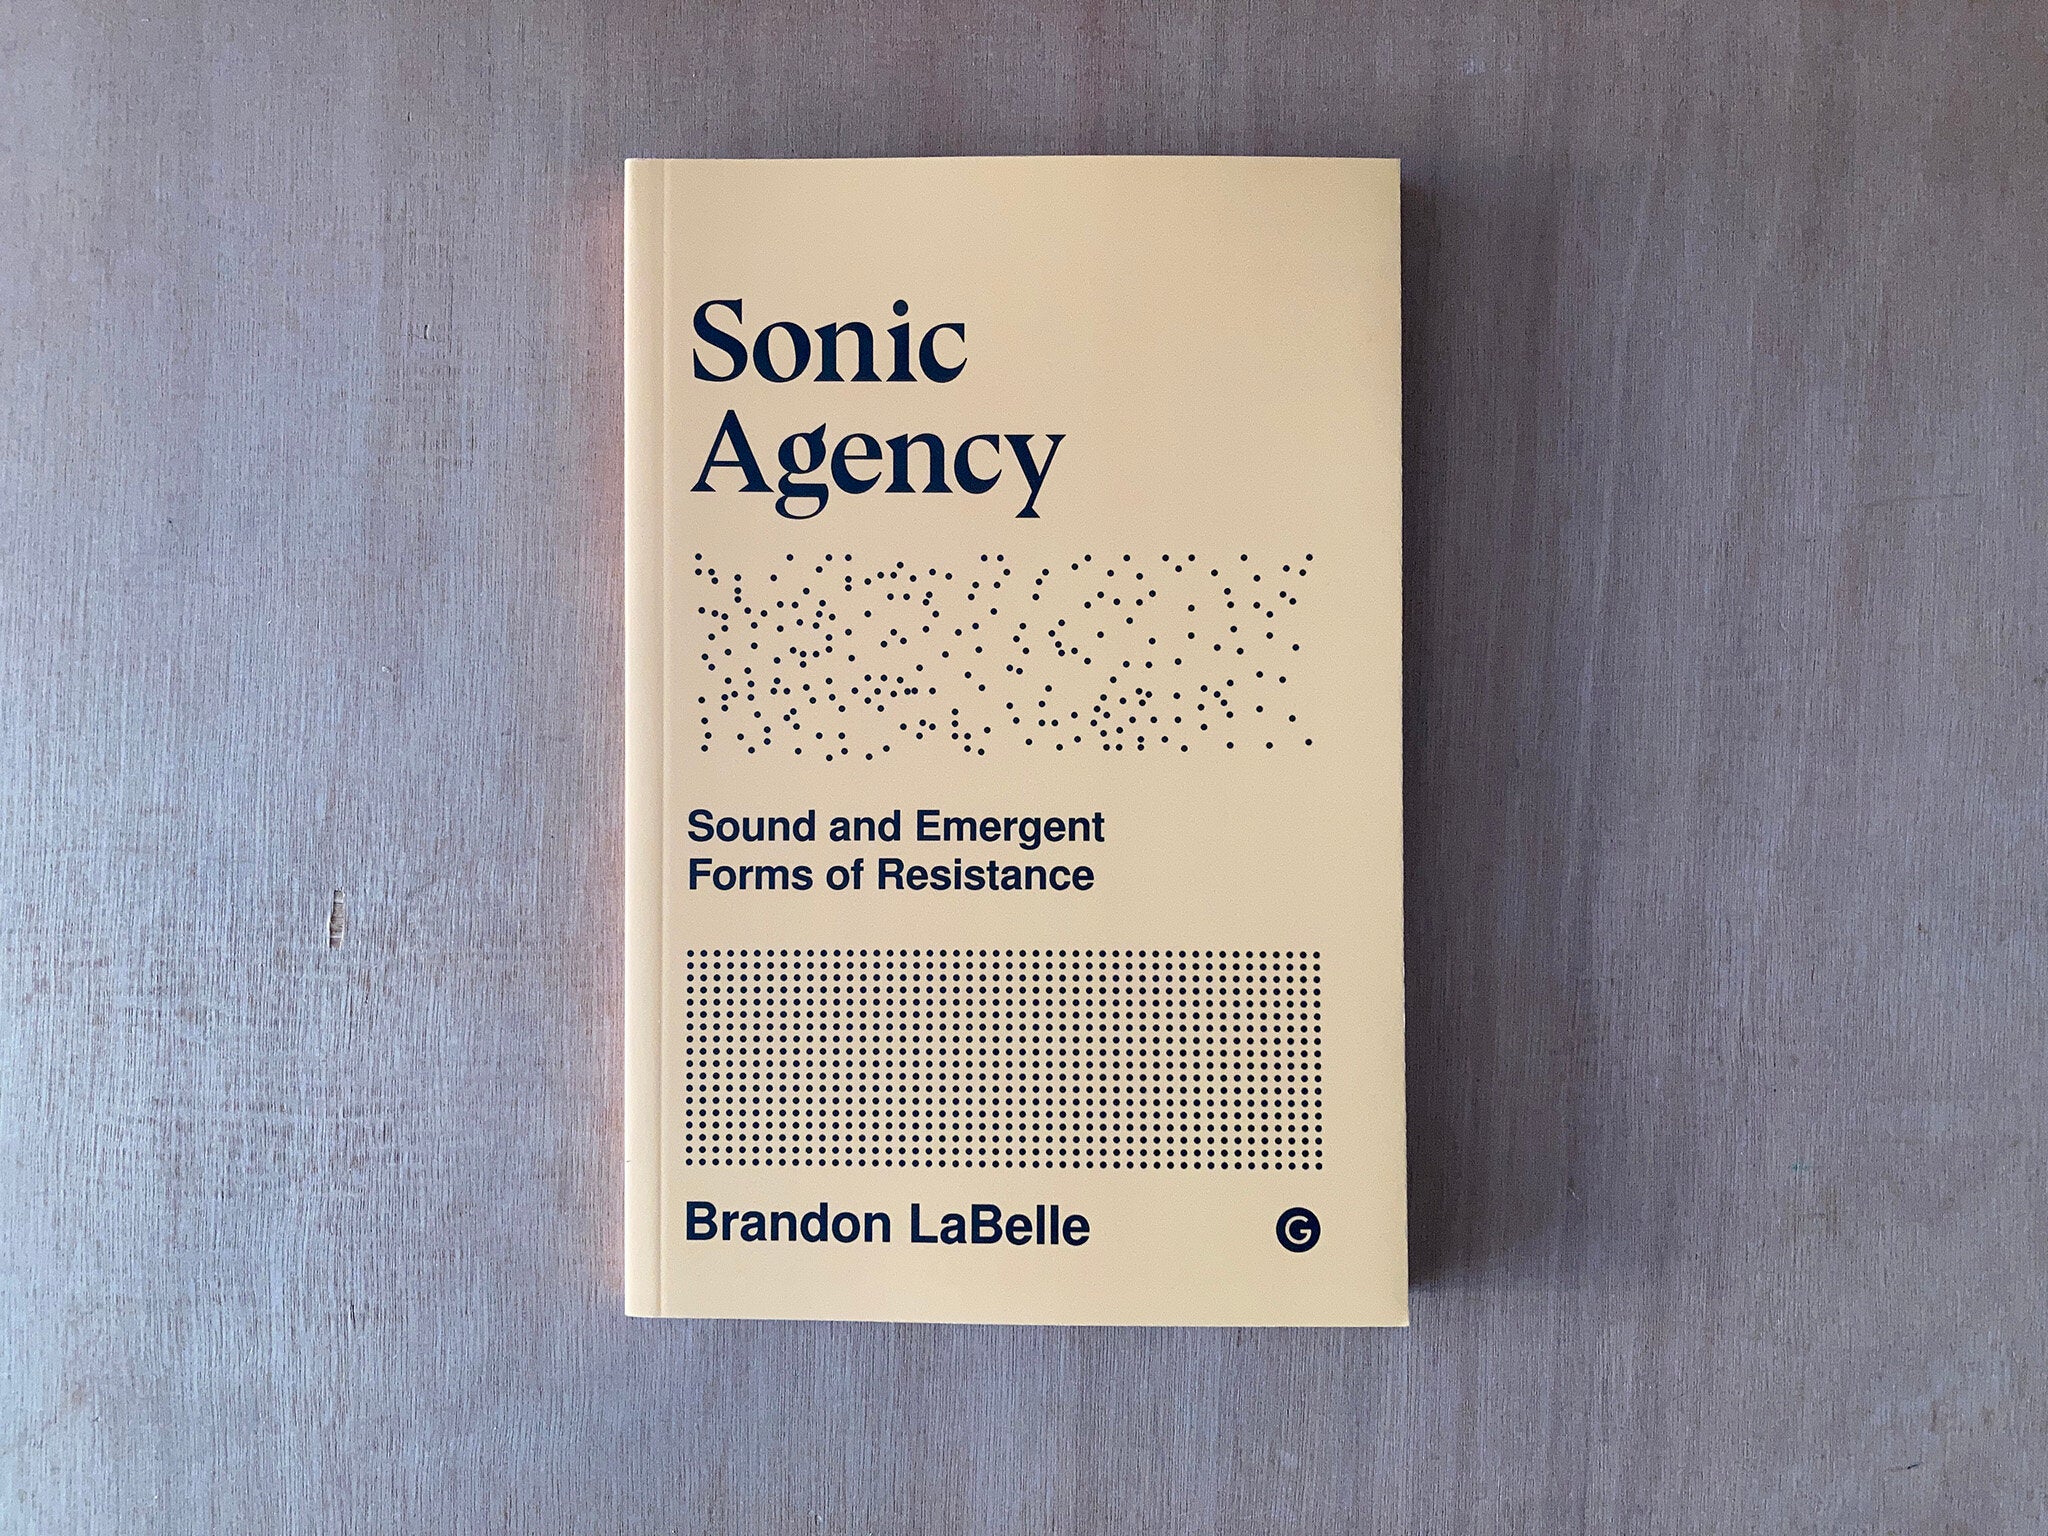 SONIC AGENCY: SOUND AND EMERGENT FORMS OF RESISTANCE by Brandon LaBelle